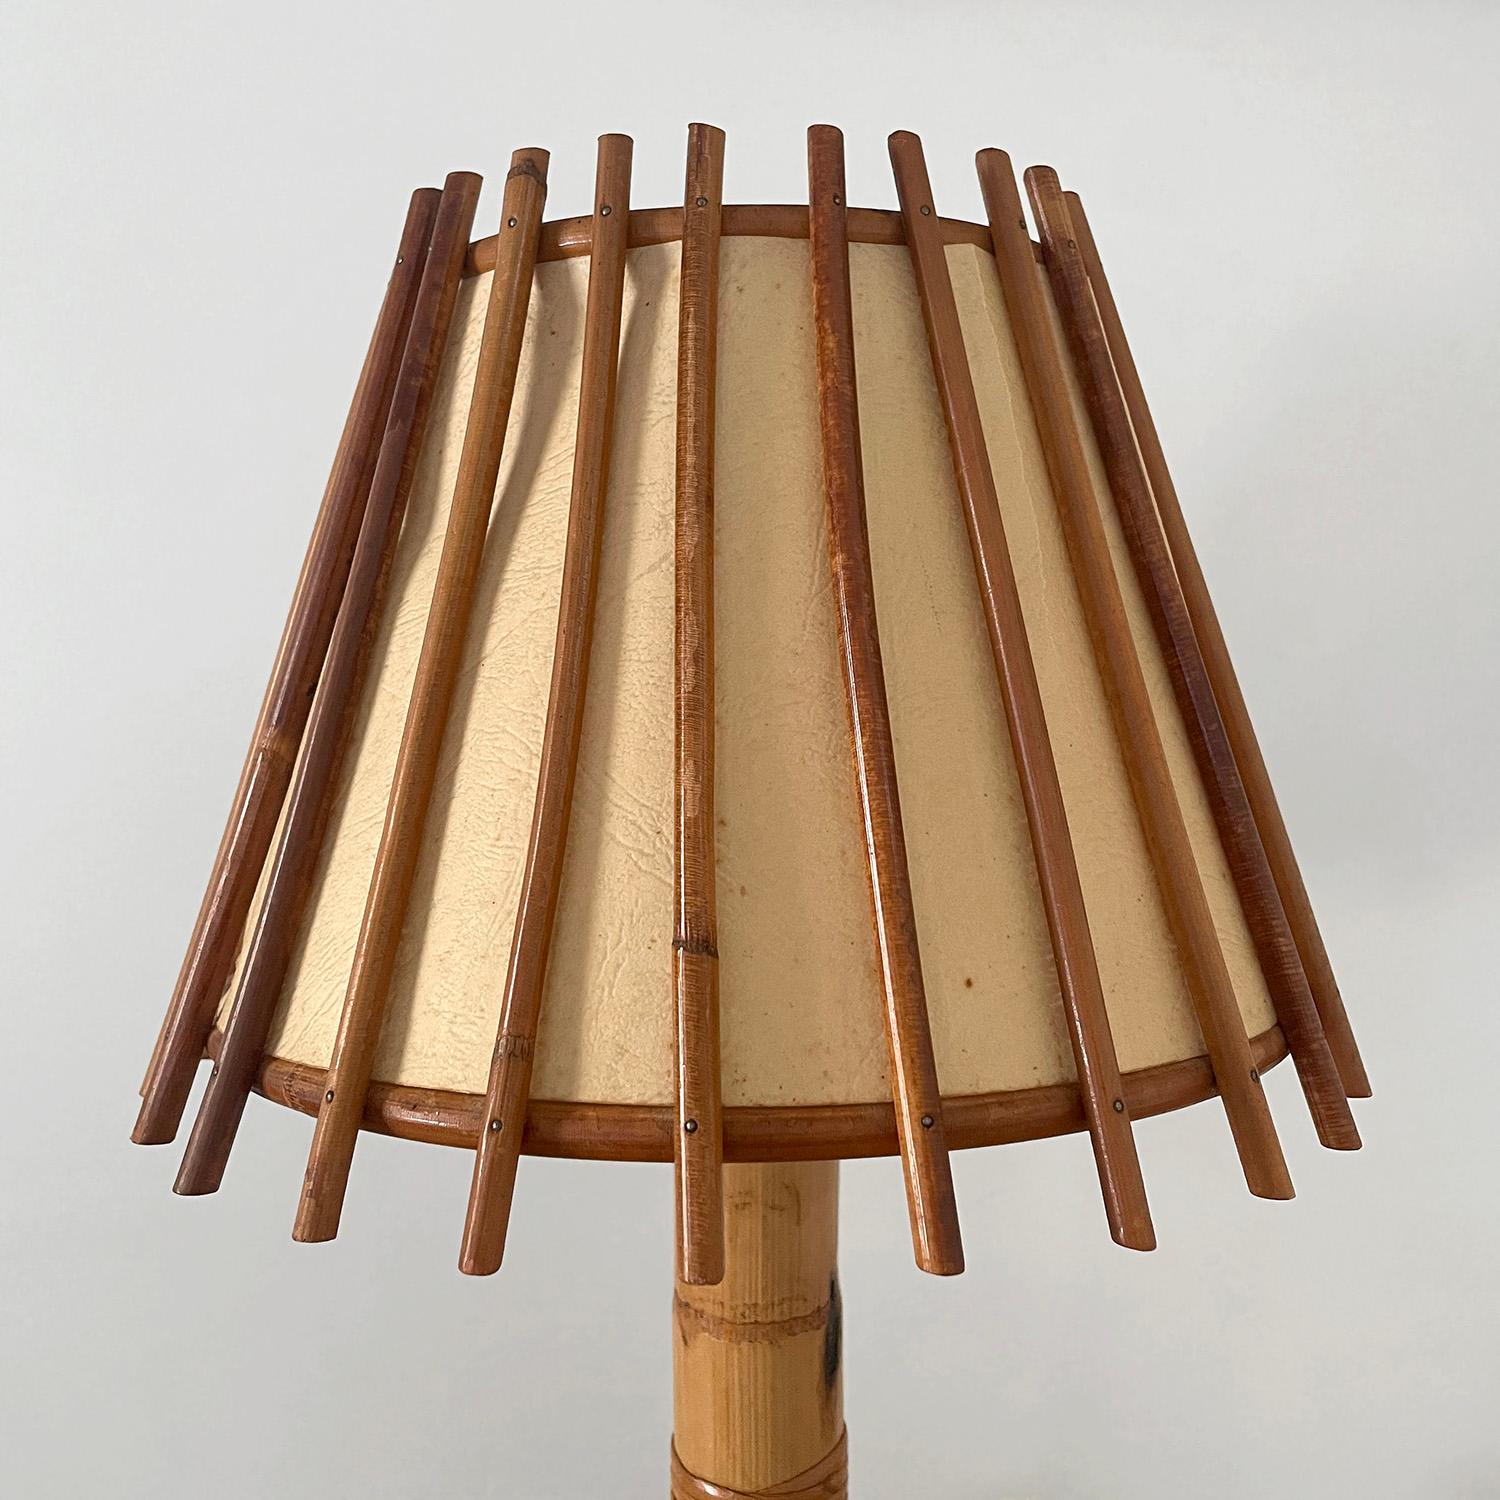 Louis Sognot French bamboo & rattan table lamp
France, circa 1960s
Organic composition and feel 
Sculpted bamboo base 
Shade is constructed of vertical rattan reeds with nail rivet detail
Original shade liners have light surface markings 
Natural